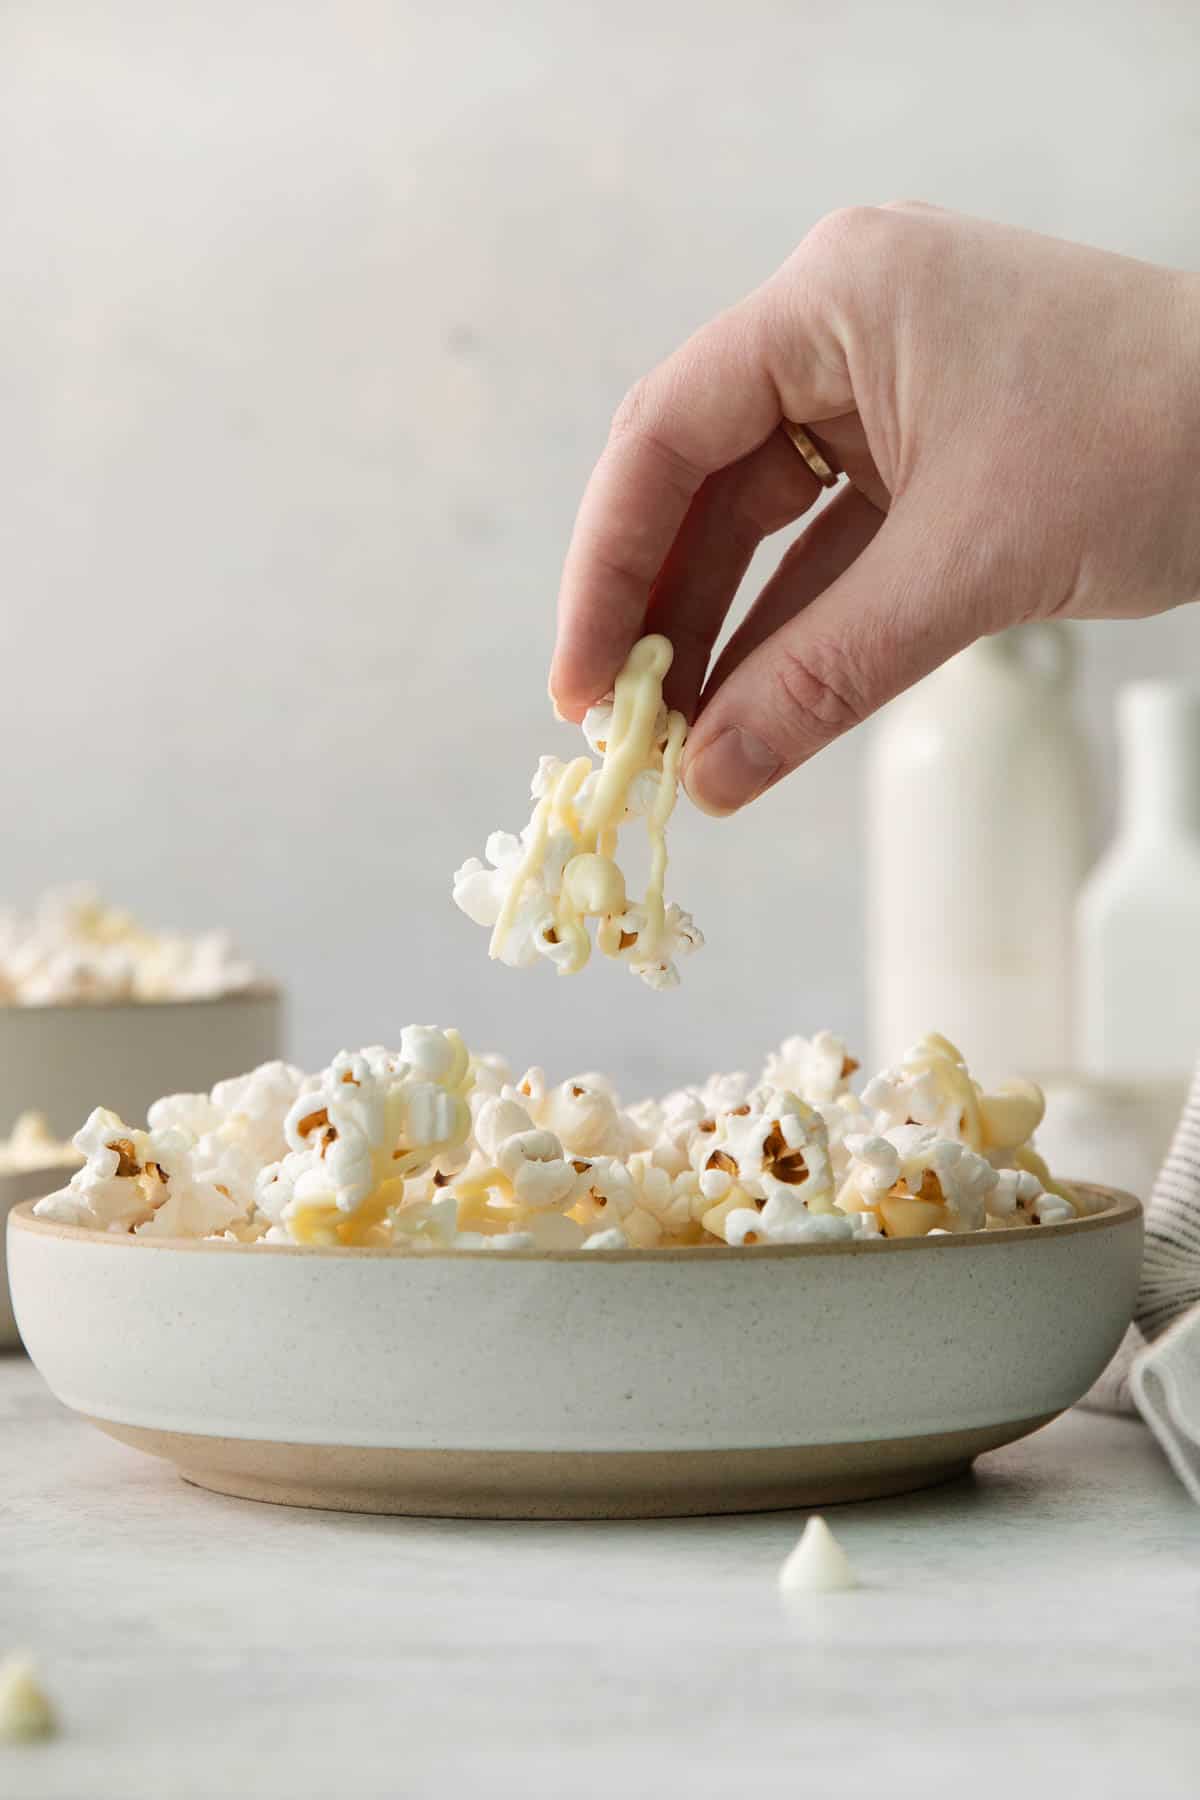 White chocolate popcorn in a bowl and a hand picking up a piece